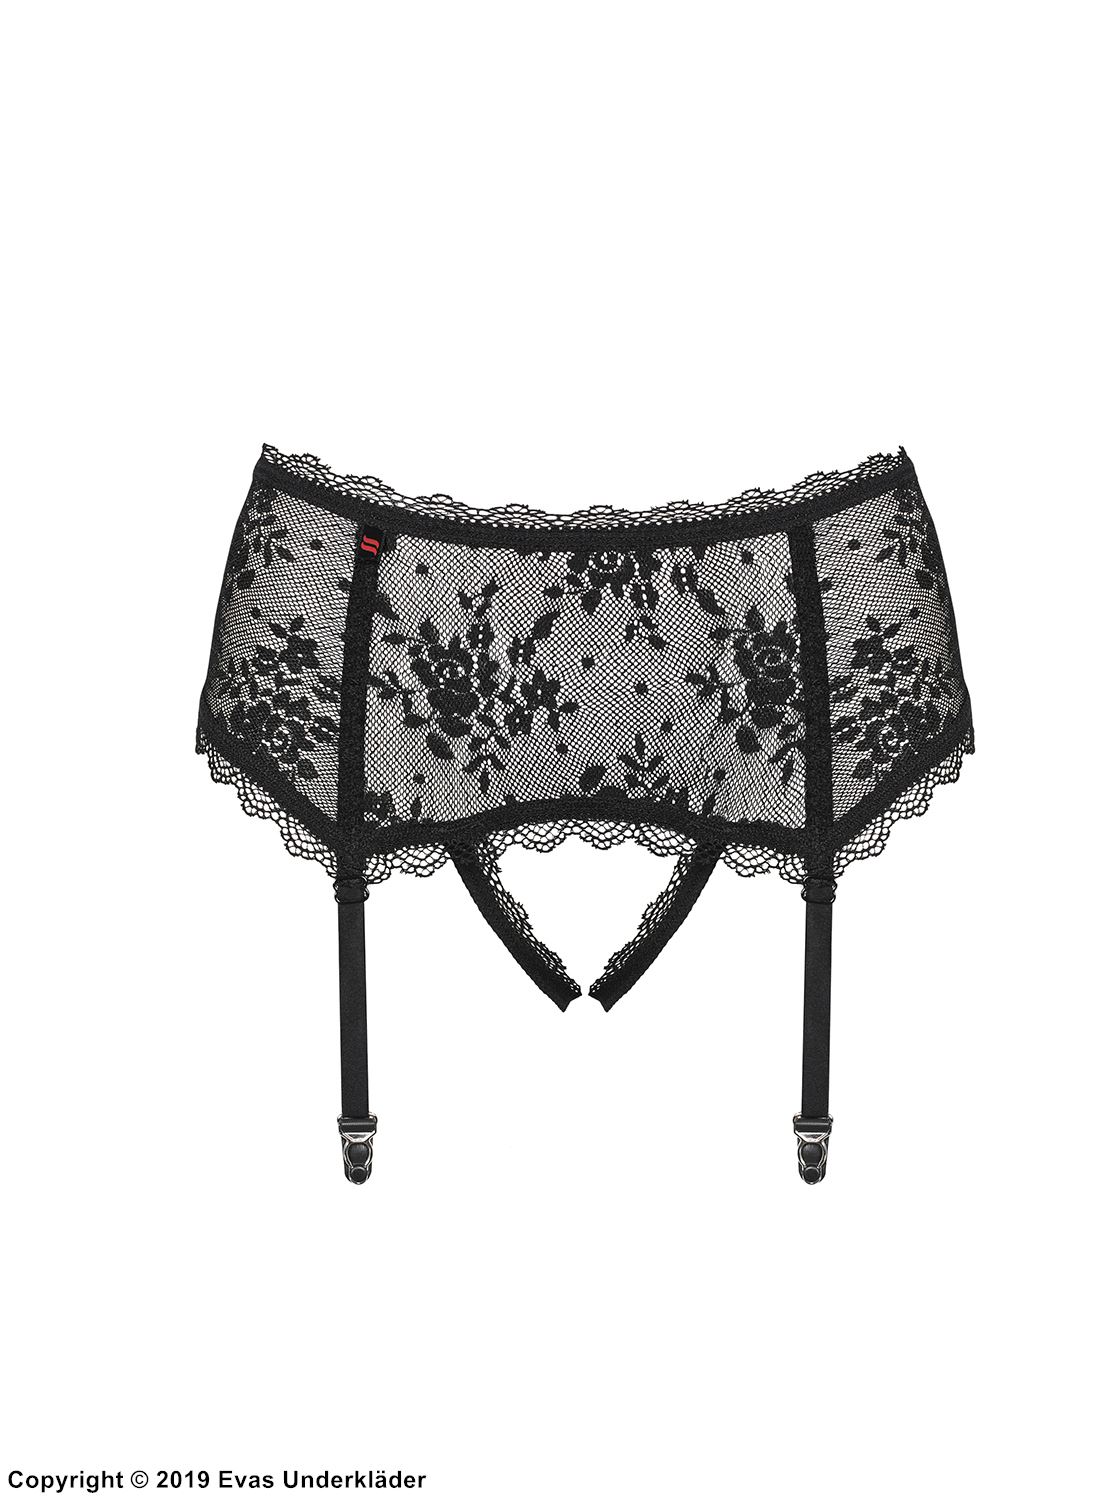 Garter belt and panty, big bow, open crotch, floral lace